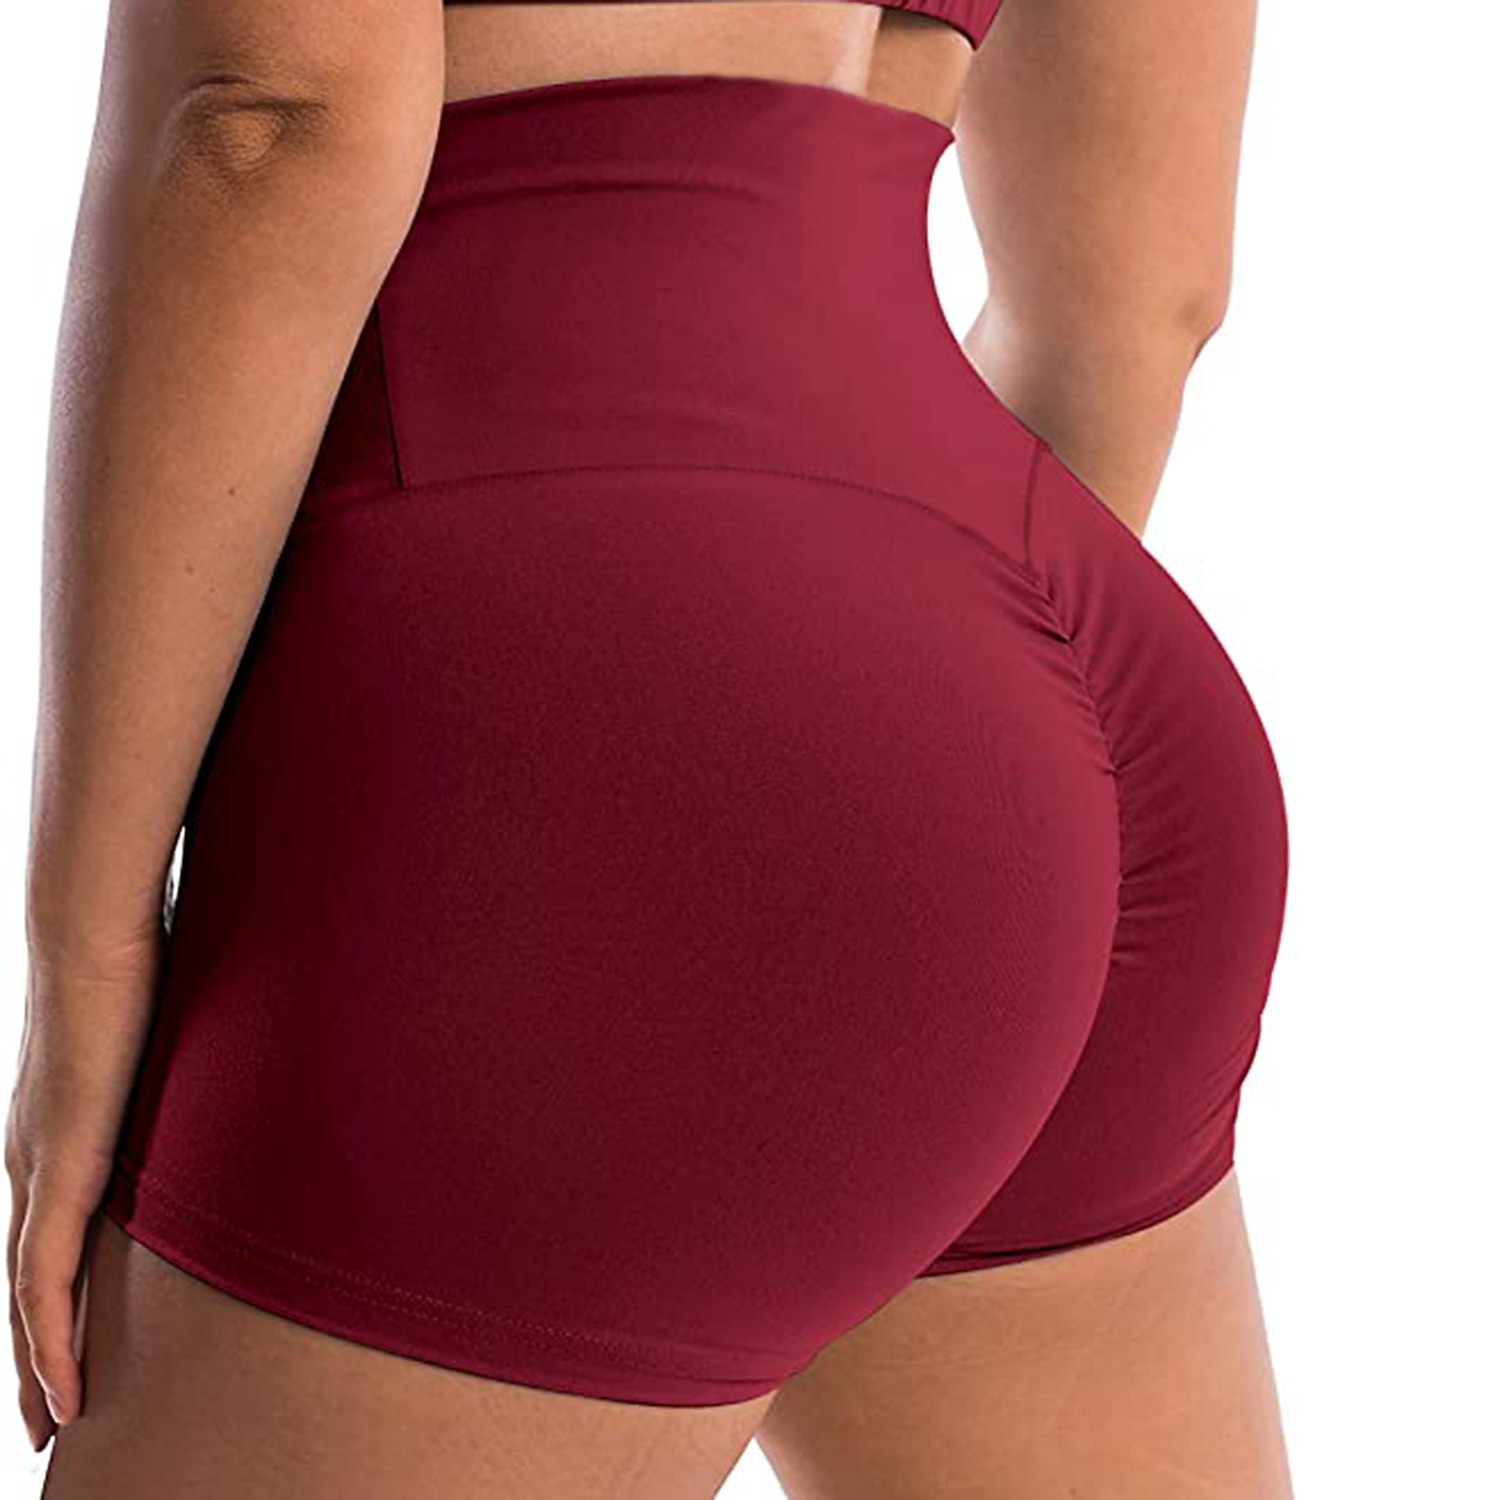 Women's High Waist Yoga Shorts Scrunch Butt Shorts Bottoms Tummy Control  Butt Lift Quick Dry Solid Color Violet Pink Burgundy Spandex Yoga Fitness  Gym